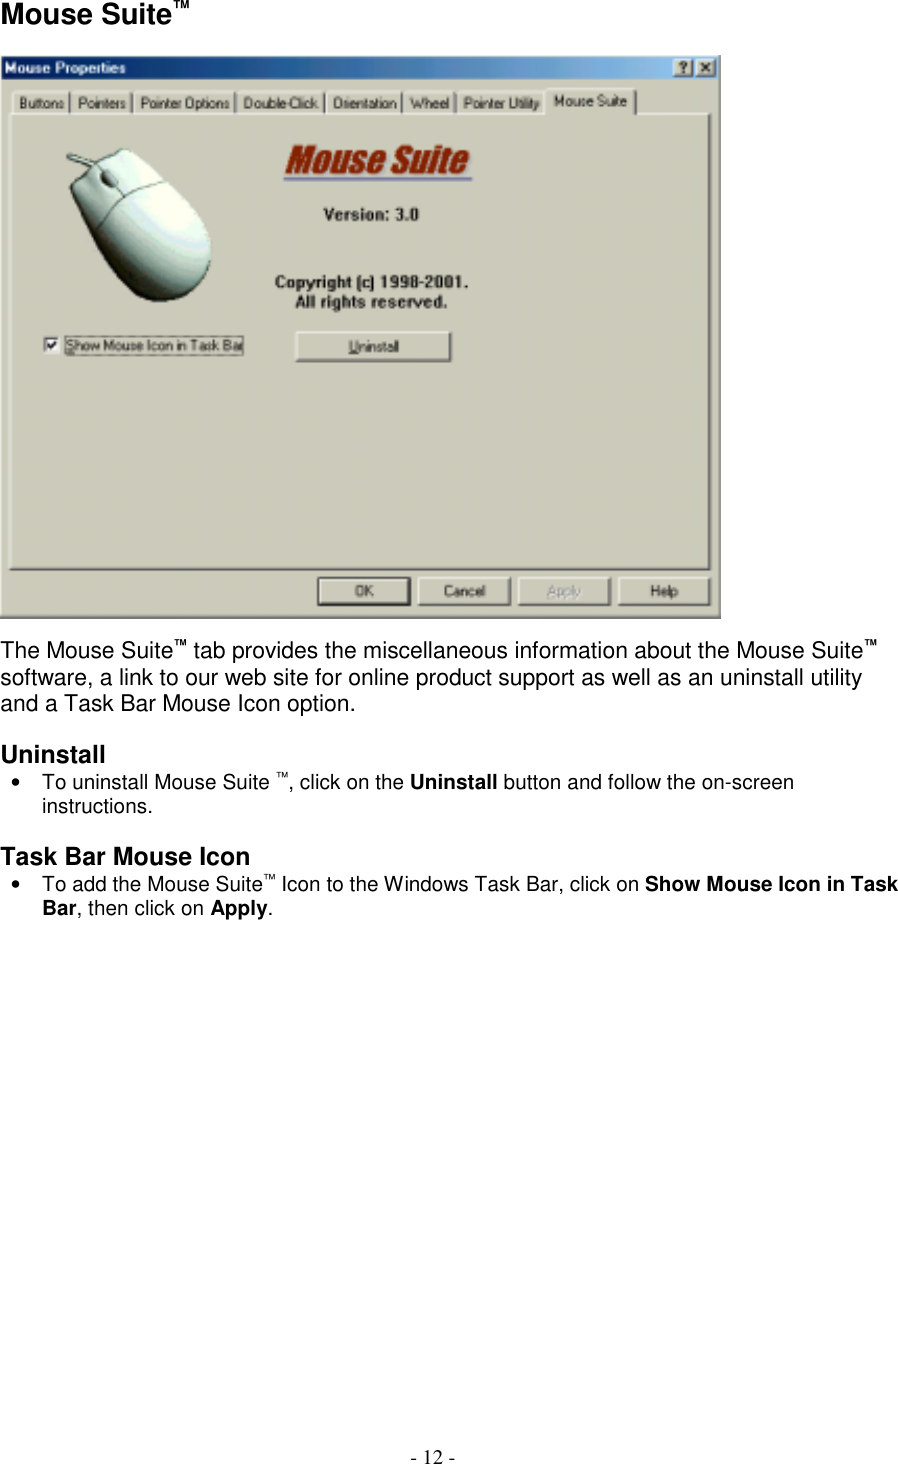 - 12 -Mouse Suite™The Mouse Suite™ tab provides the miscellaneous information about the Mouse Suite™software, a link to our web site for online product support as well as an uninstall utilityand a Task Bar Mouse Icon option.Uninstall•  To uninstall Mouse Suite ™, click on the Uninstall button and follow the on-screeninstructions.Task Bar Mouse Icon•  To add the Mouse Suite™ Icon to the Windows Task Bar, click on Show Mouse Icon in TaskBar, then click on Apply.